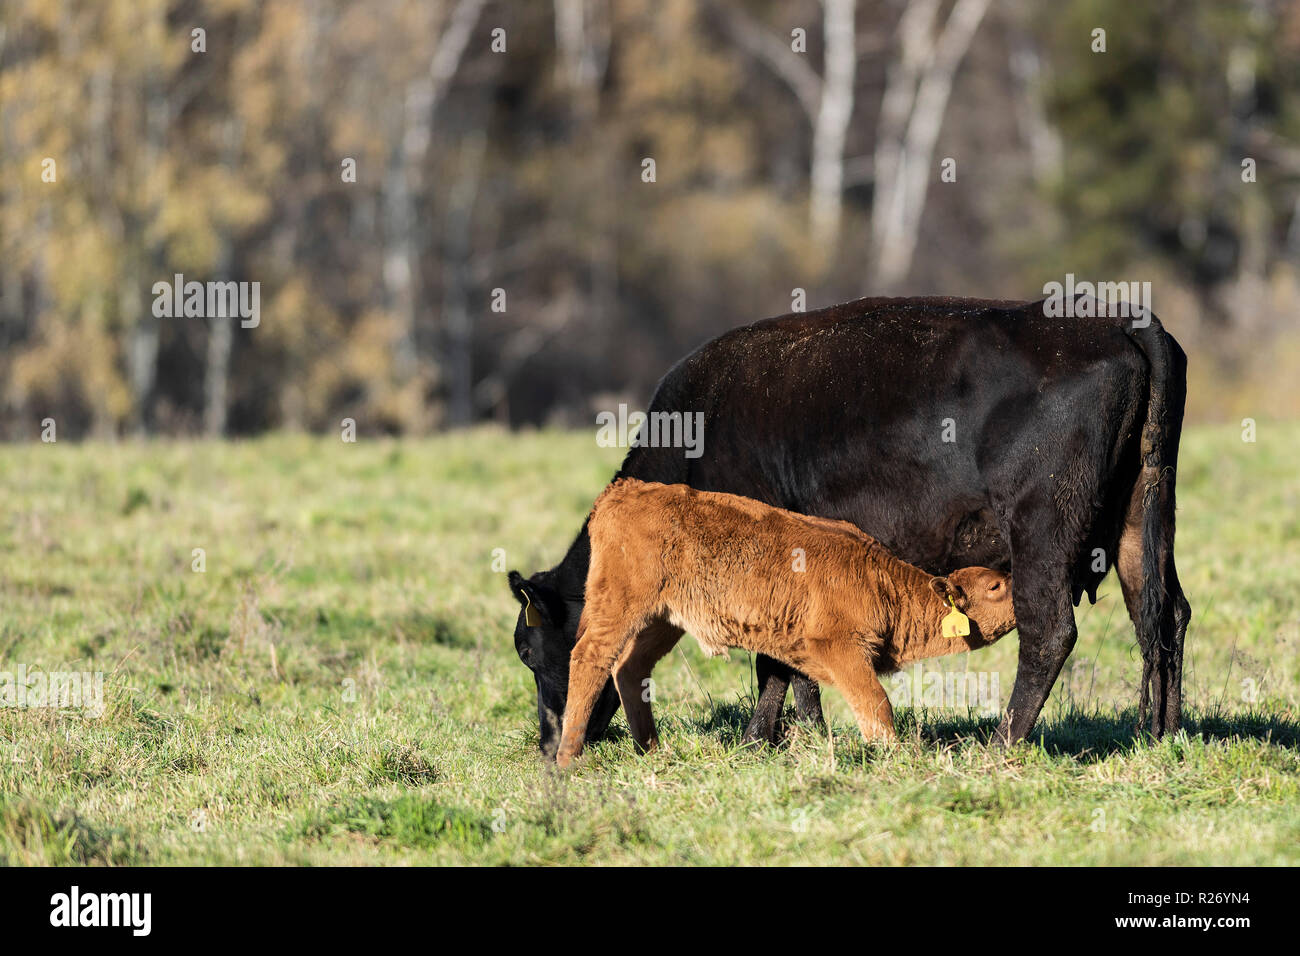 A Black angus cow and her calf on a Minnesota Ranch Stock Photo